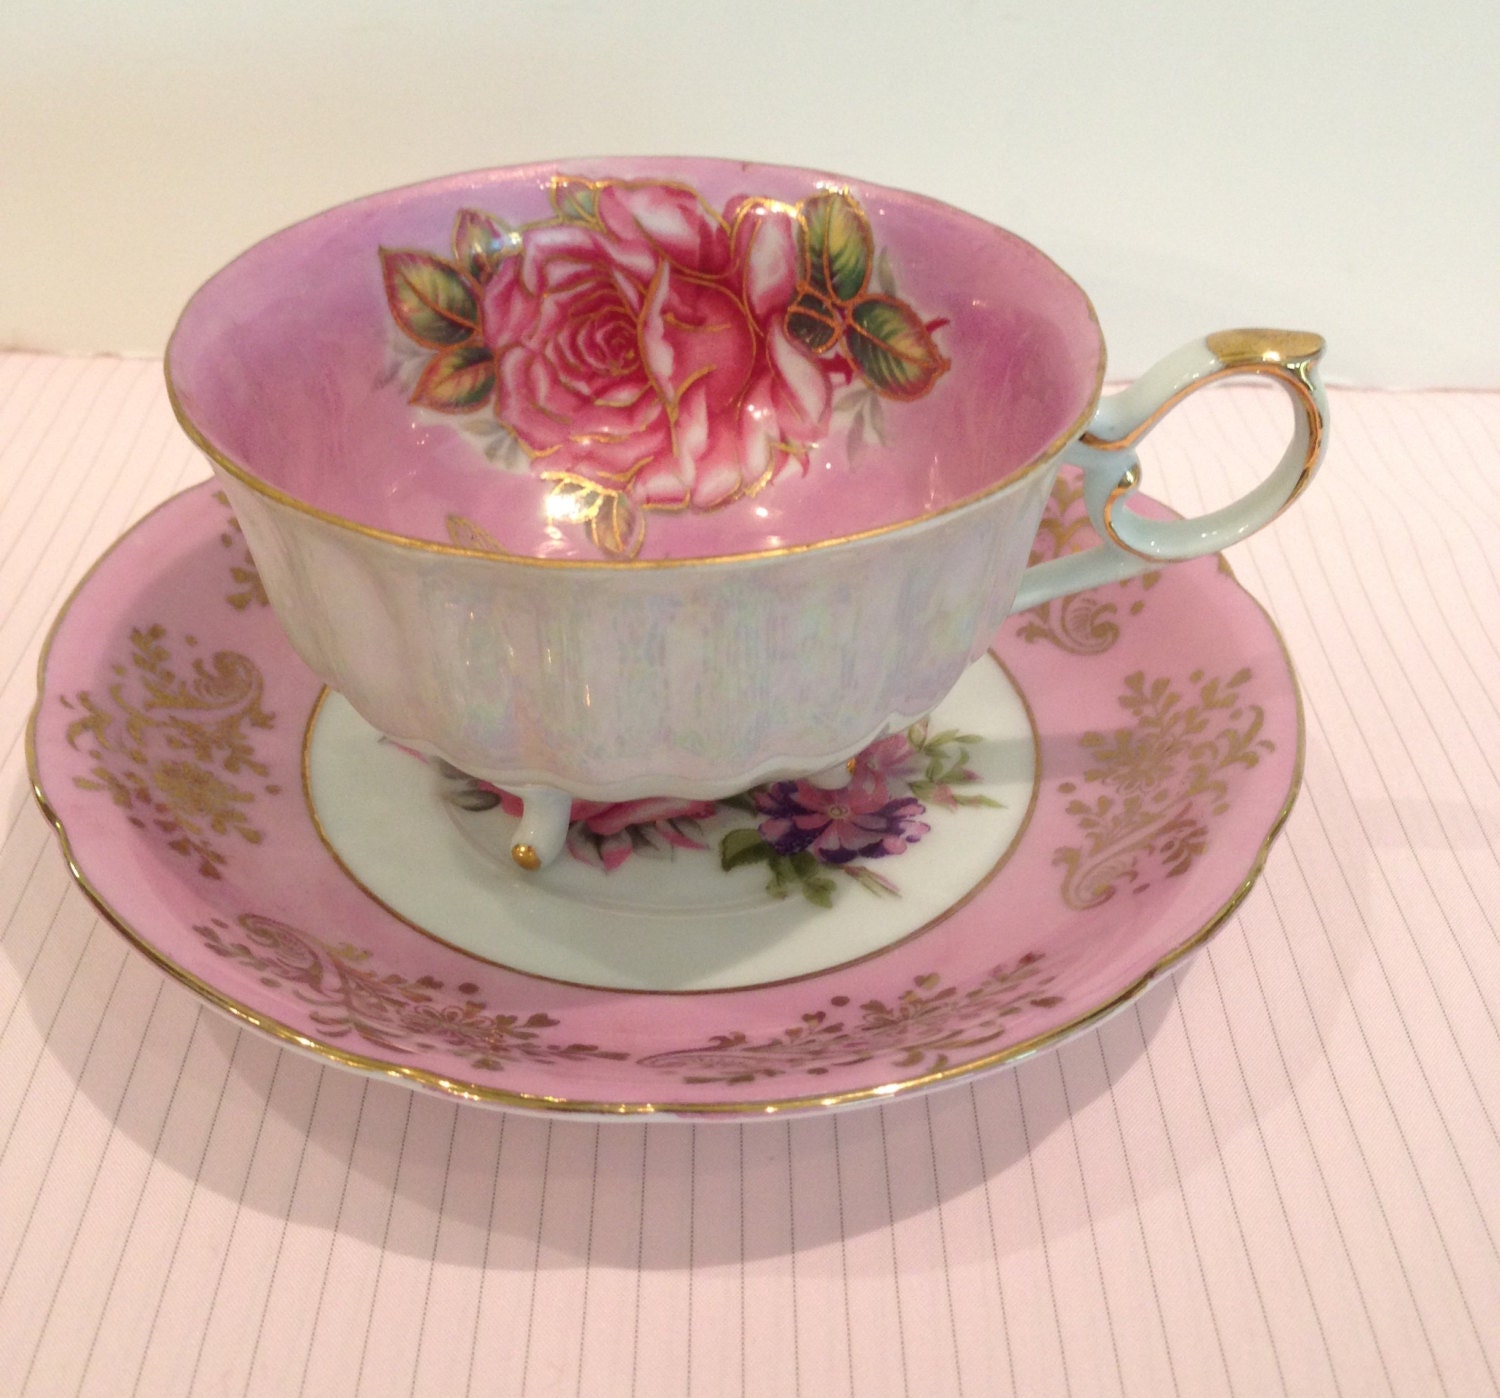 Royal Halsey Very Fine China Rose Opalescent Cup & Saucer Royal Halsey Very Fine China Worth